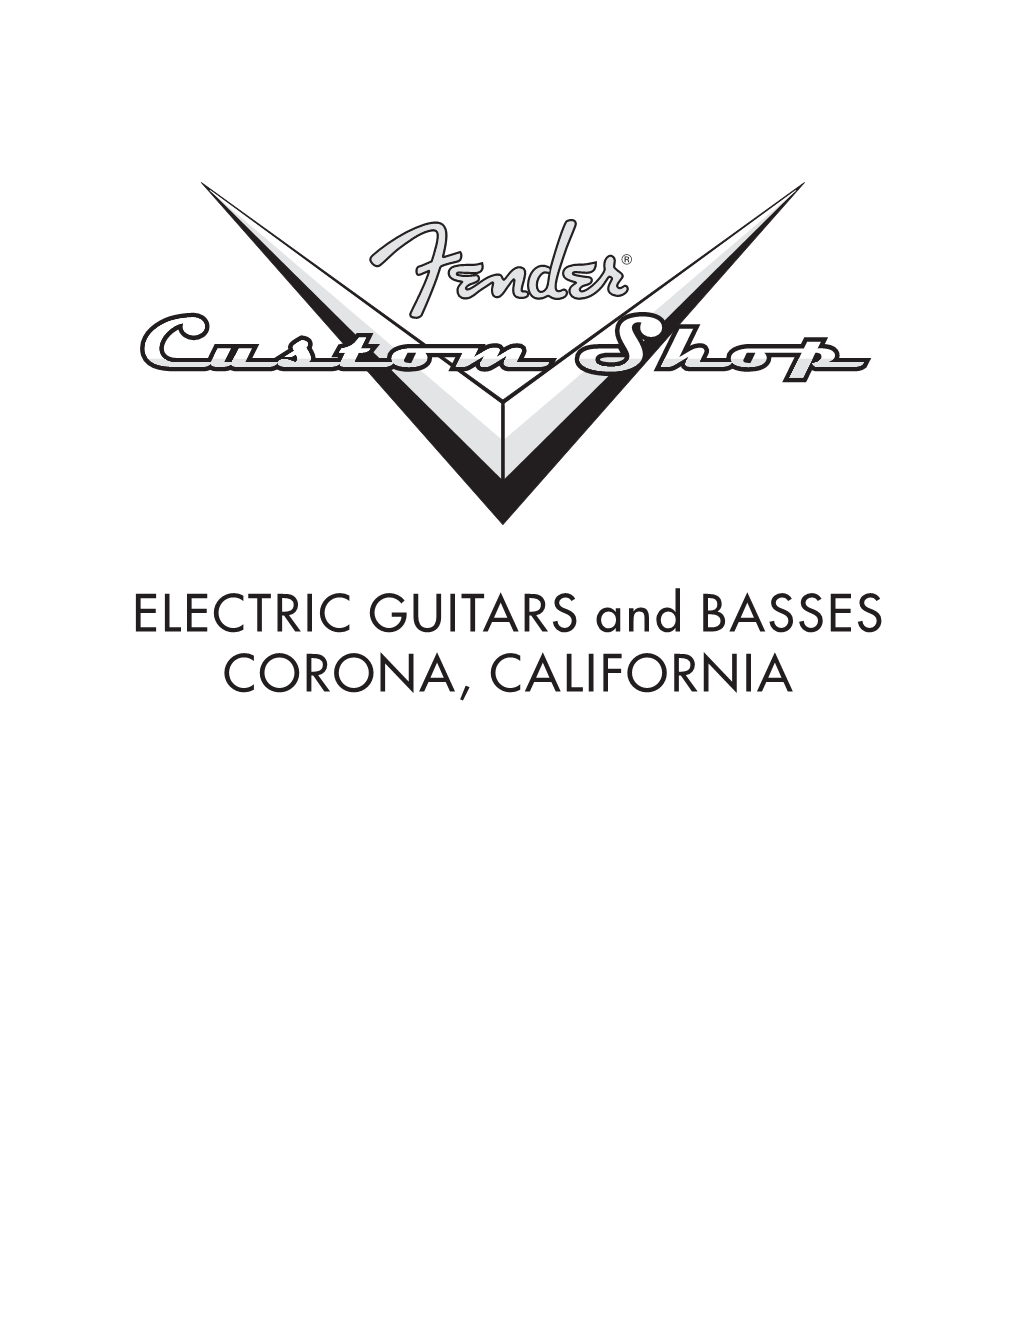 Fender® Custom Shop All Fender Custom Shop Instruments Are Built to the Highest Standards of Workmanship and Materials in Corona, California